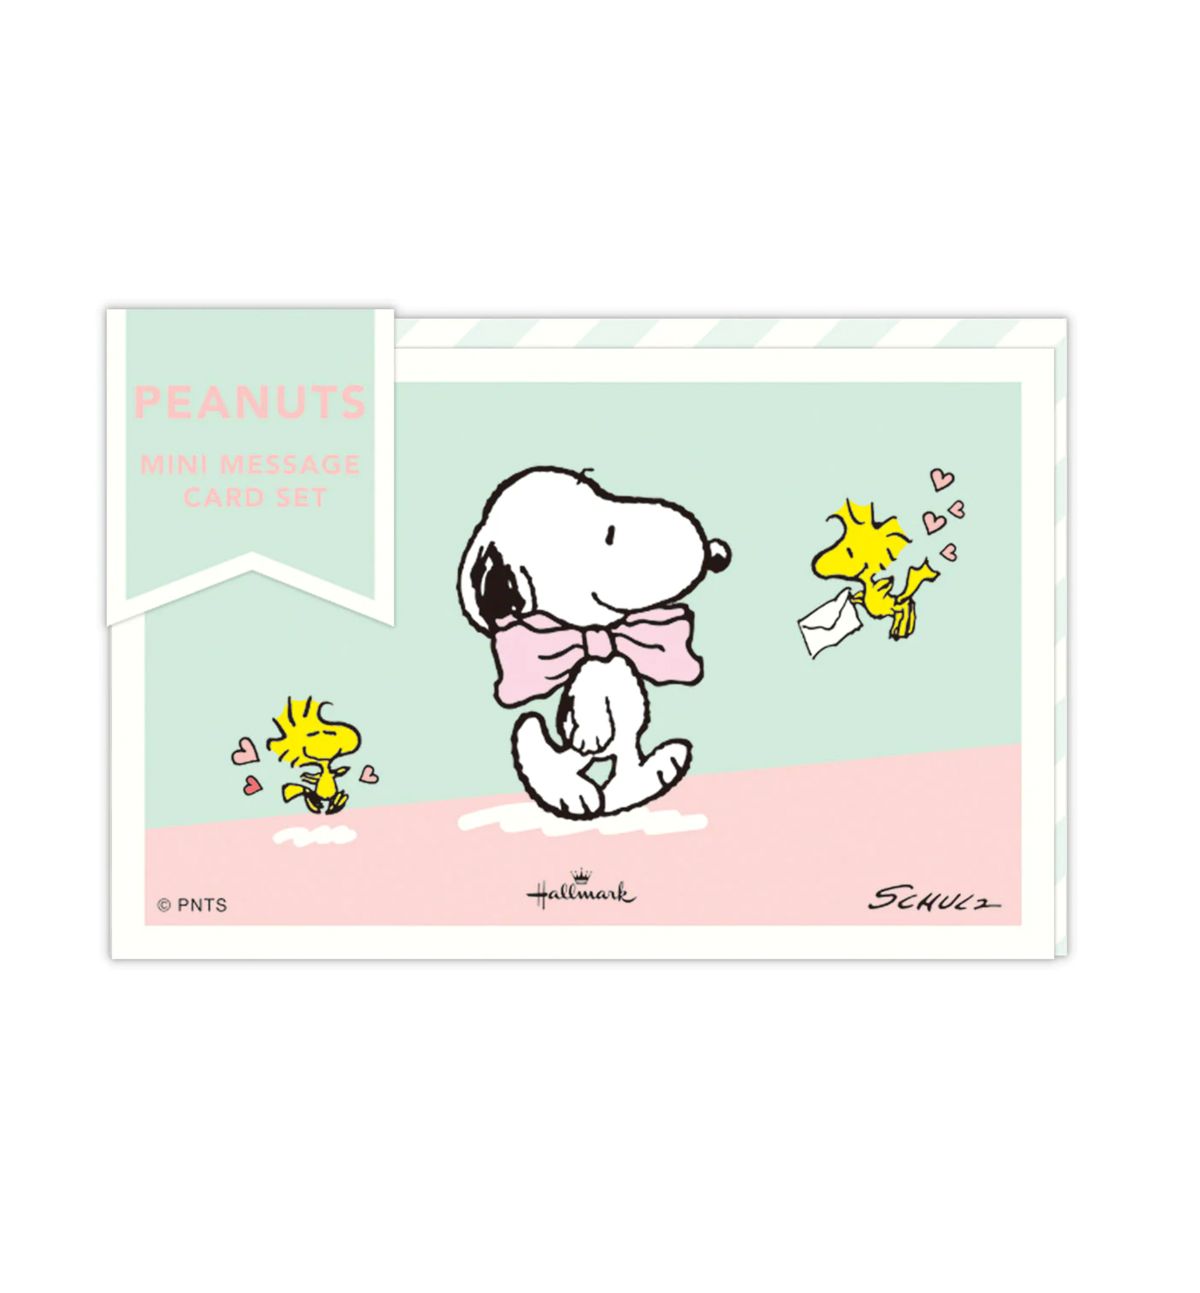 Peanuts Snoopy Be Yourself Mini Message Card Set [Mint]